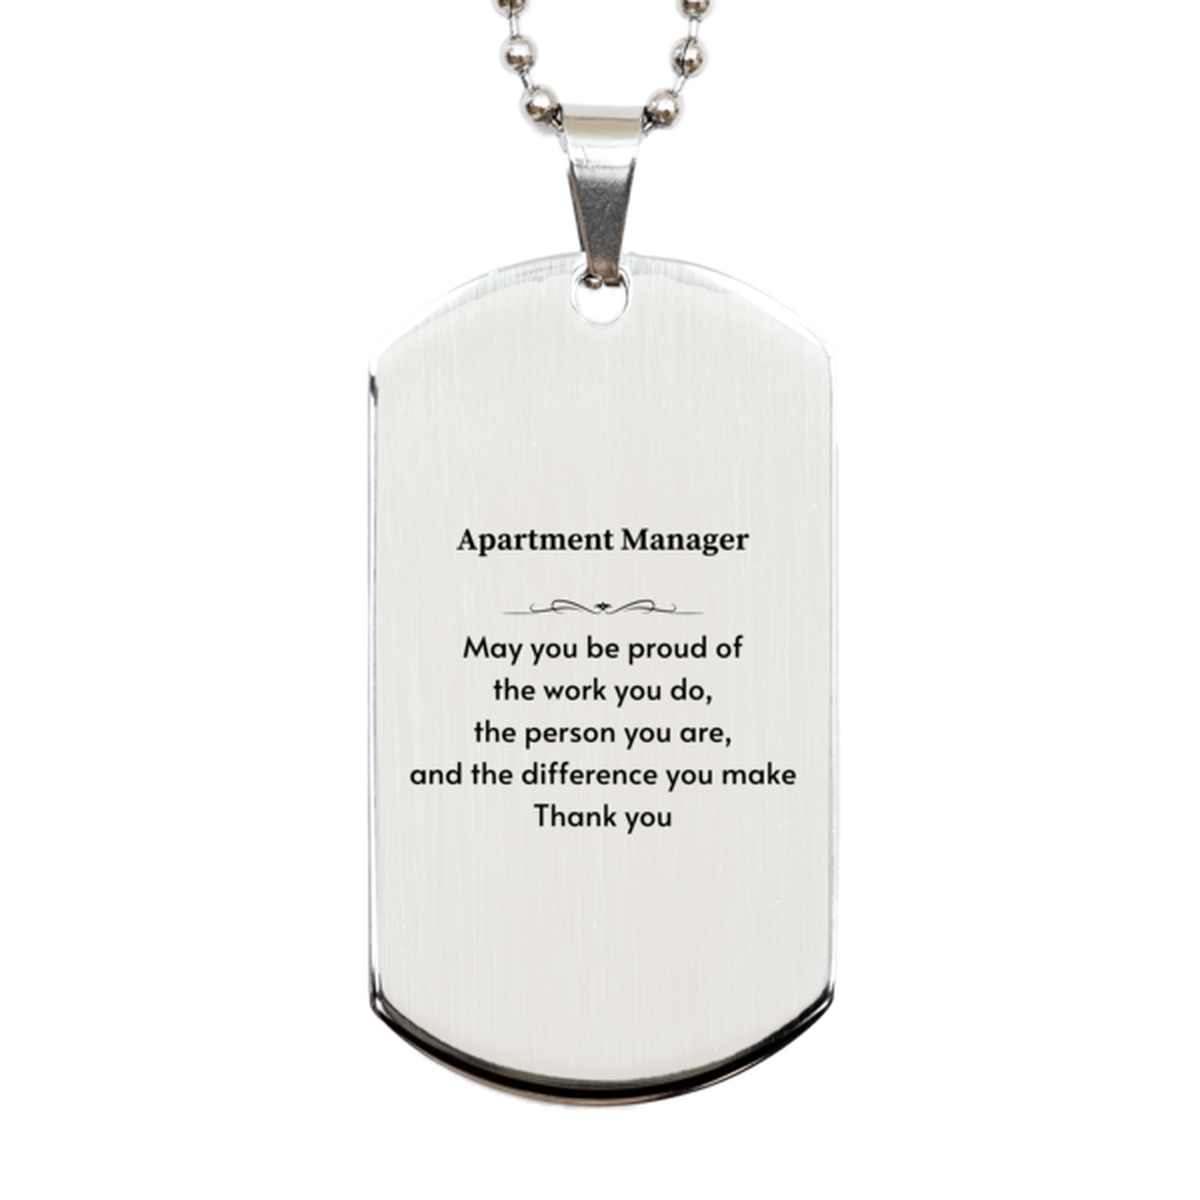 Heartwarming Silver Dog Tag Retirement Coworkers Gifts for Apartment Manager, Apartment Manager May You be proud of the work you do, the person you are Gifts for Boss Men Women Friends